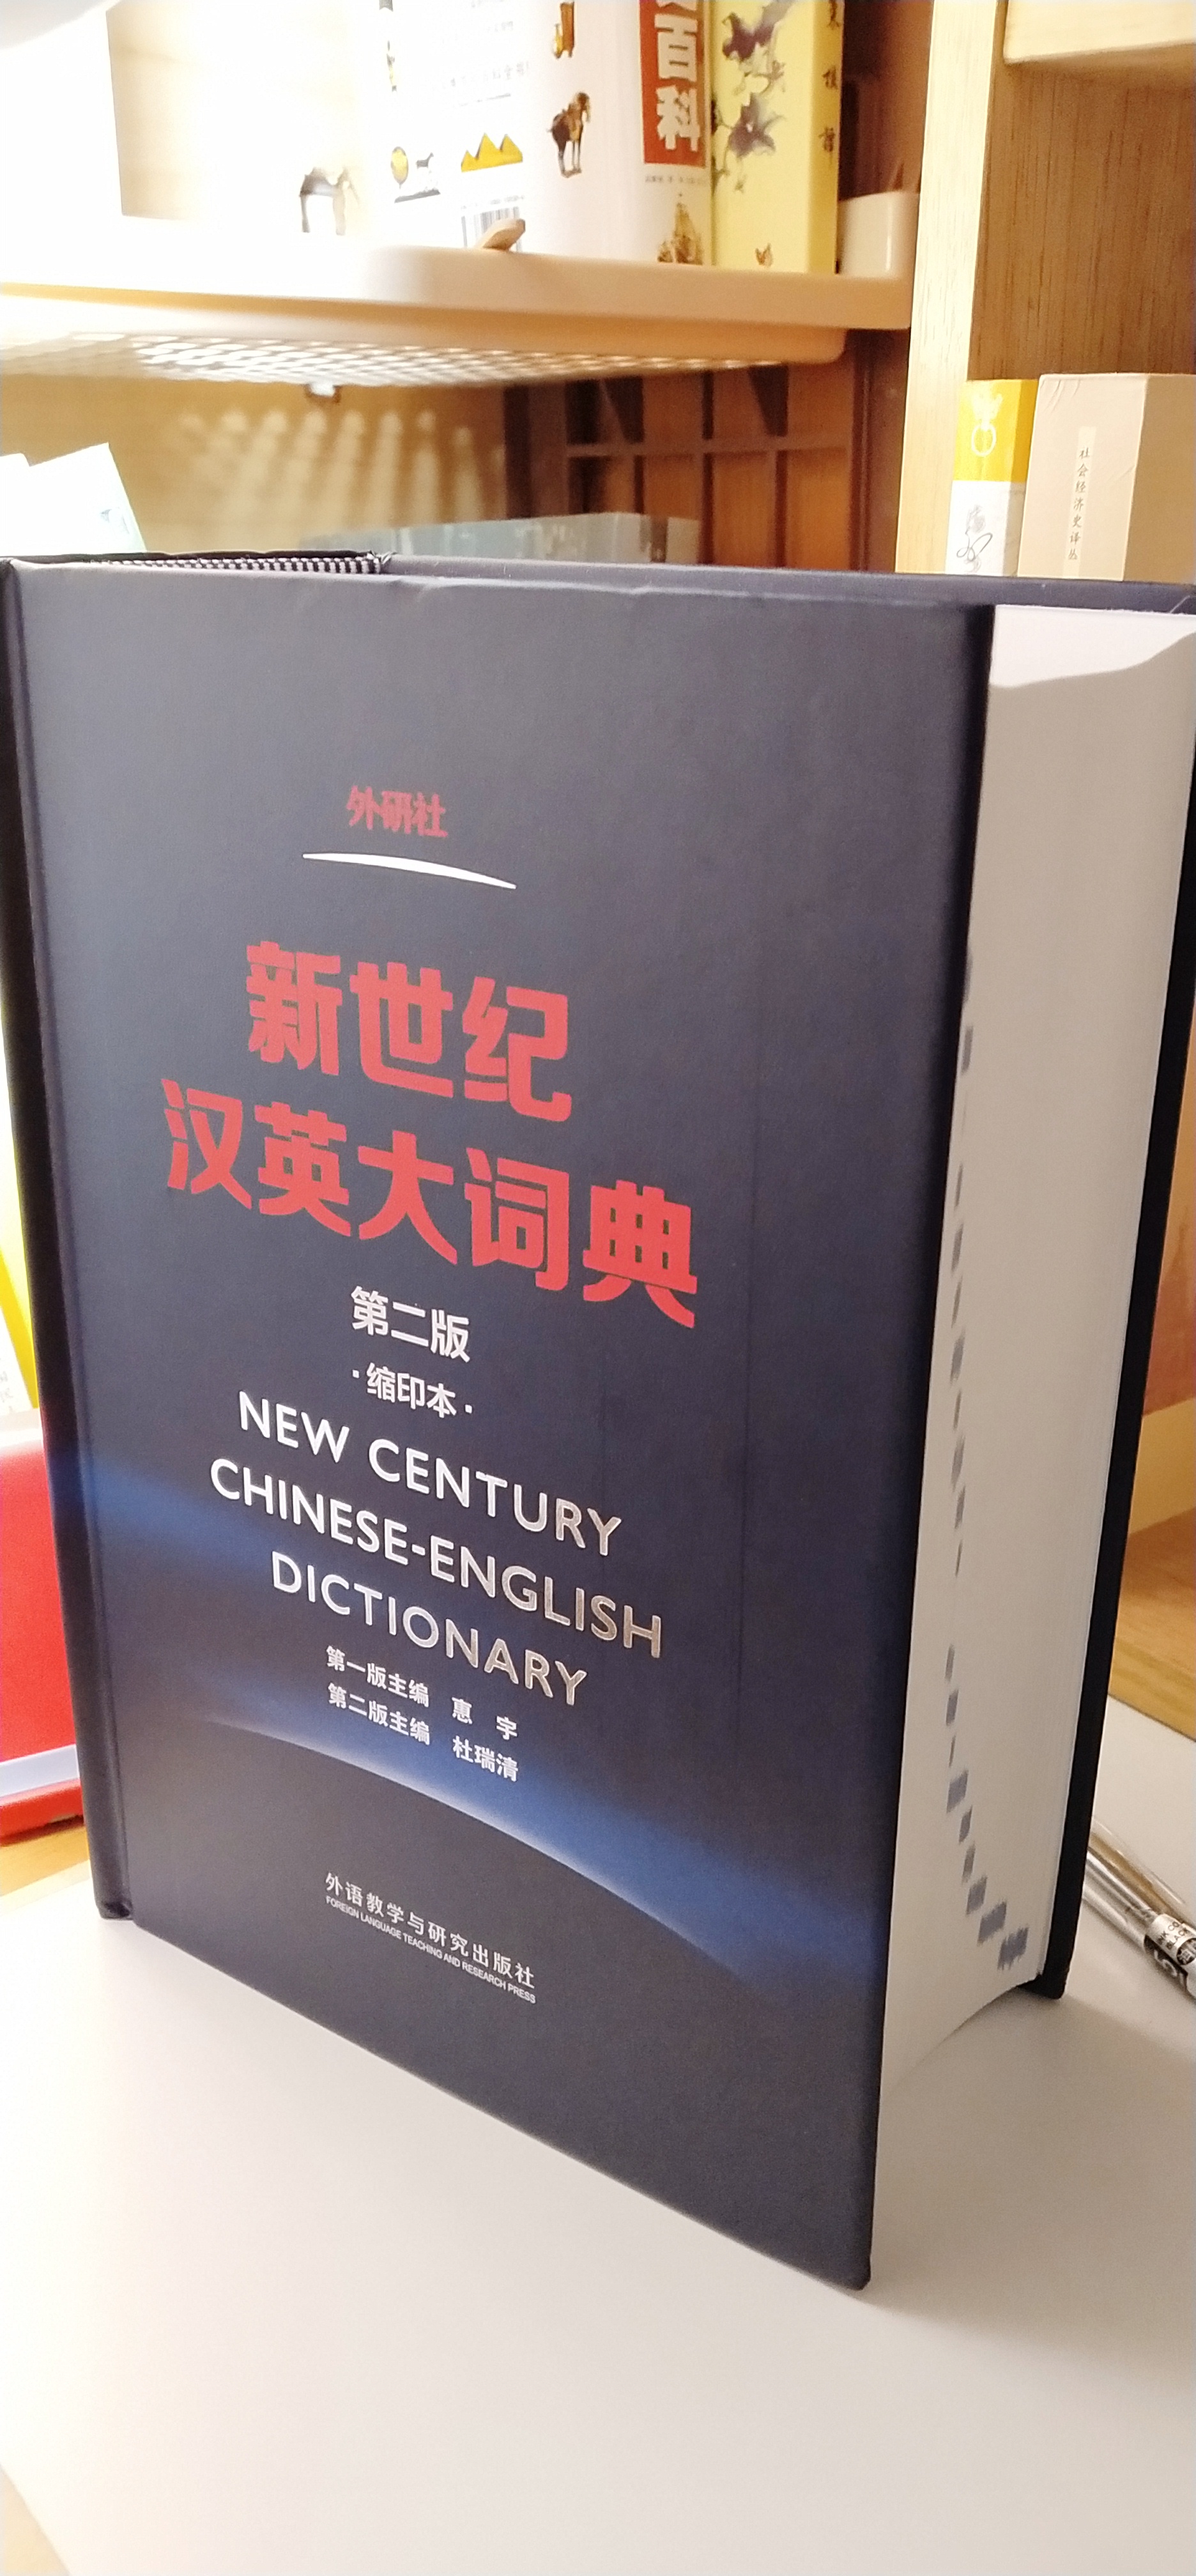 Frank's New Century Chinese-English Dictionary for easier blog writing